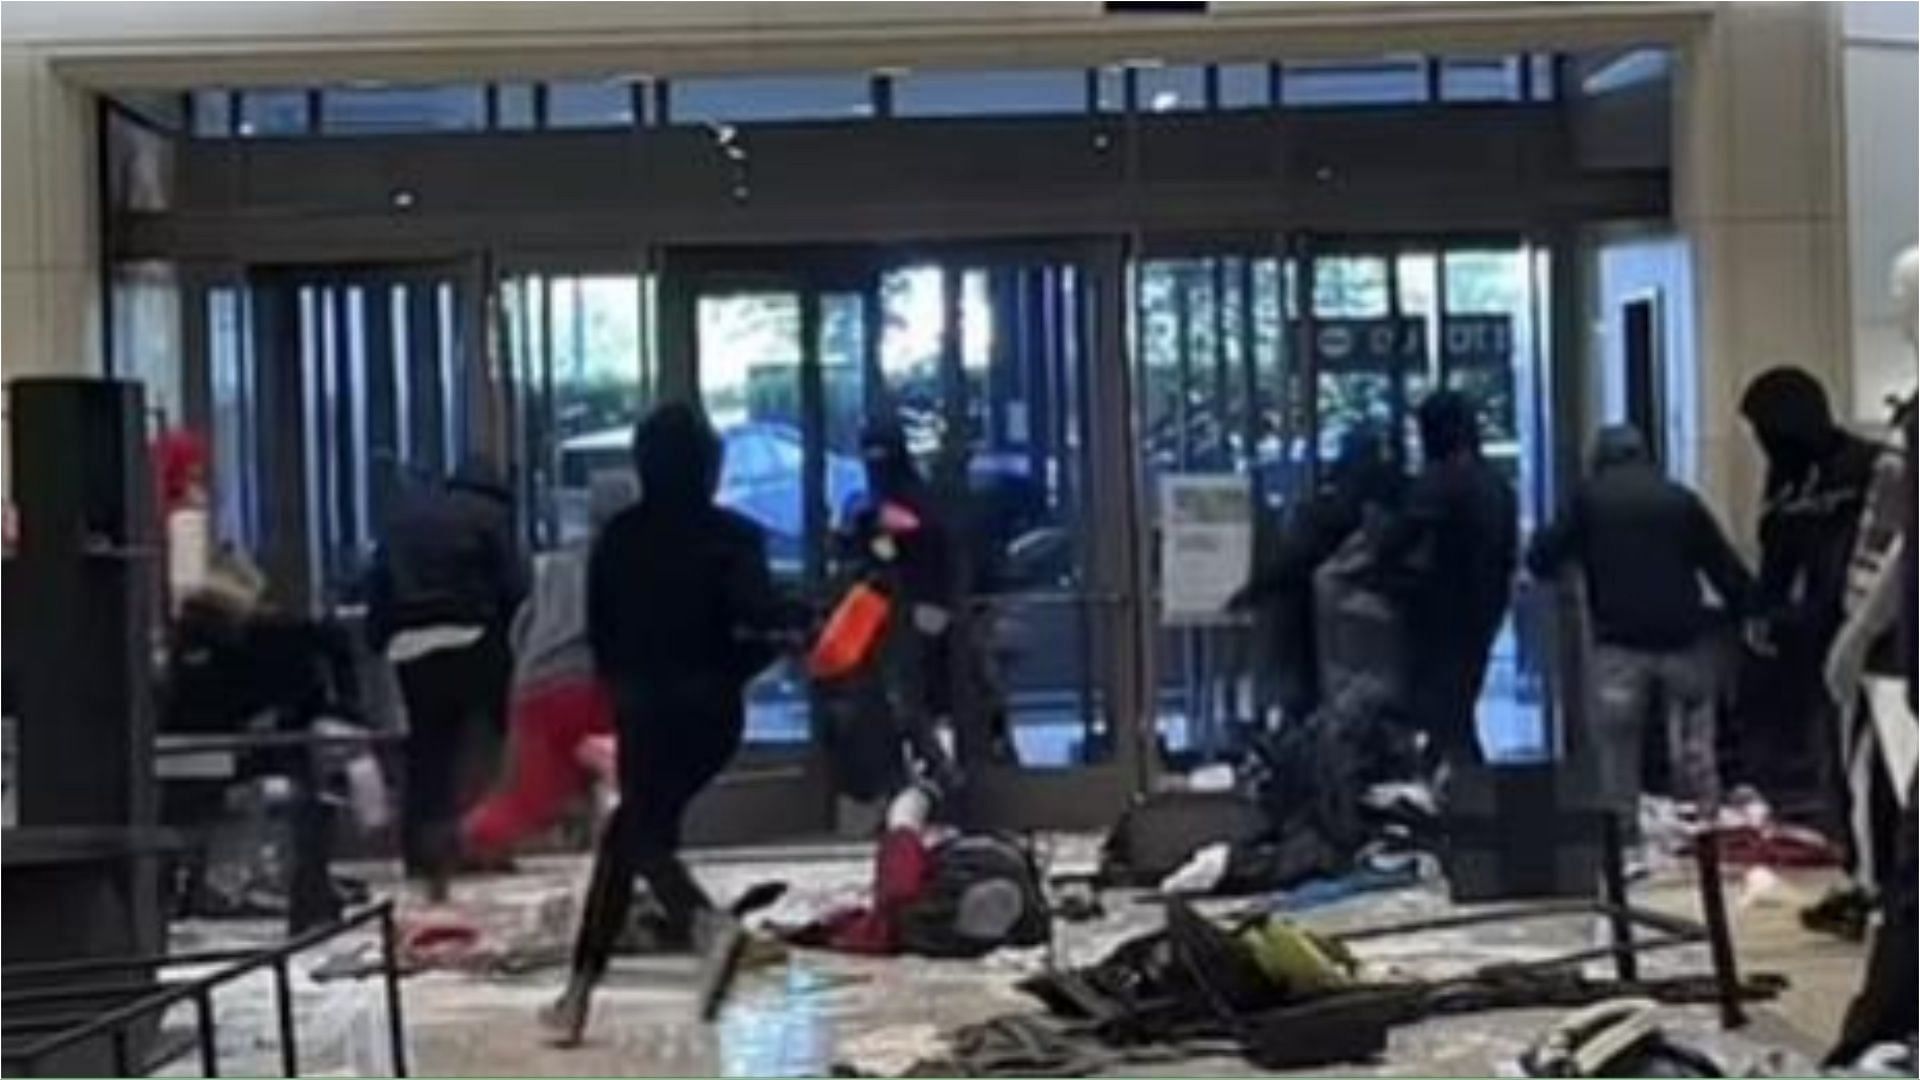 Topanga Mall was robbed by a group of robbers on Saturday (Image via Glenn Beck/Facebook)